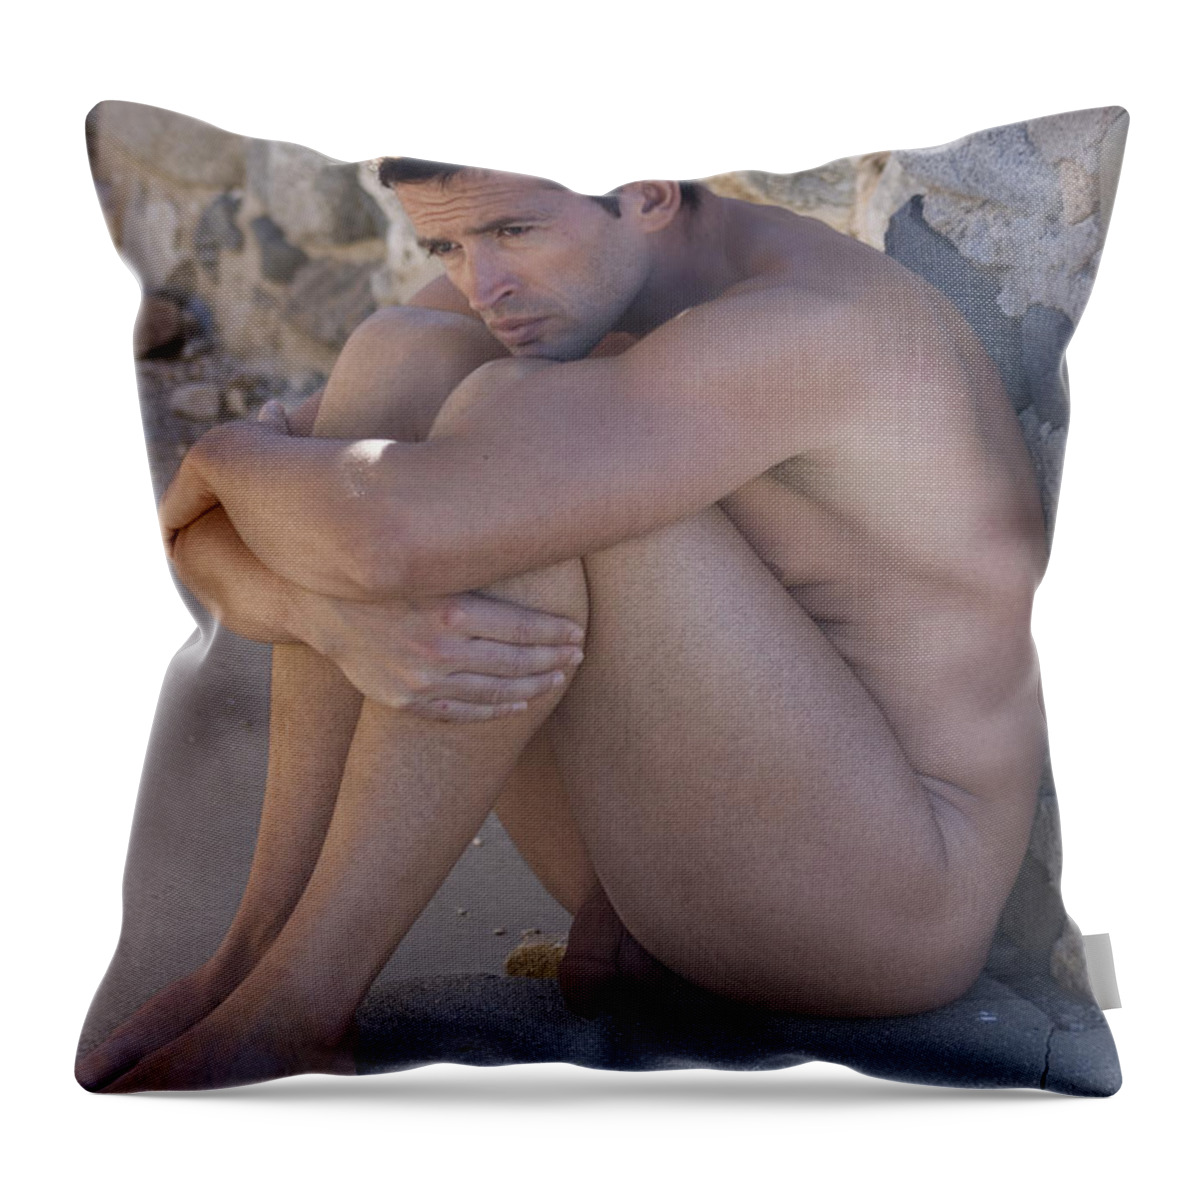 Male Throw Pillow featuring the photograph Stefano M. 3 by Andy Shomock